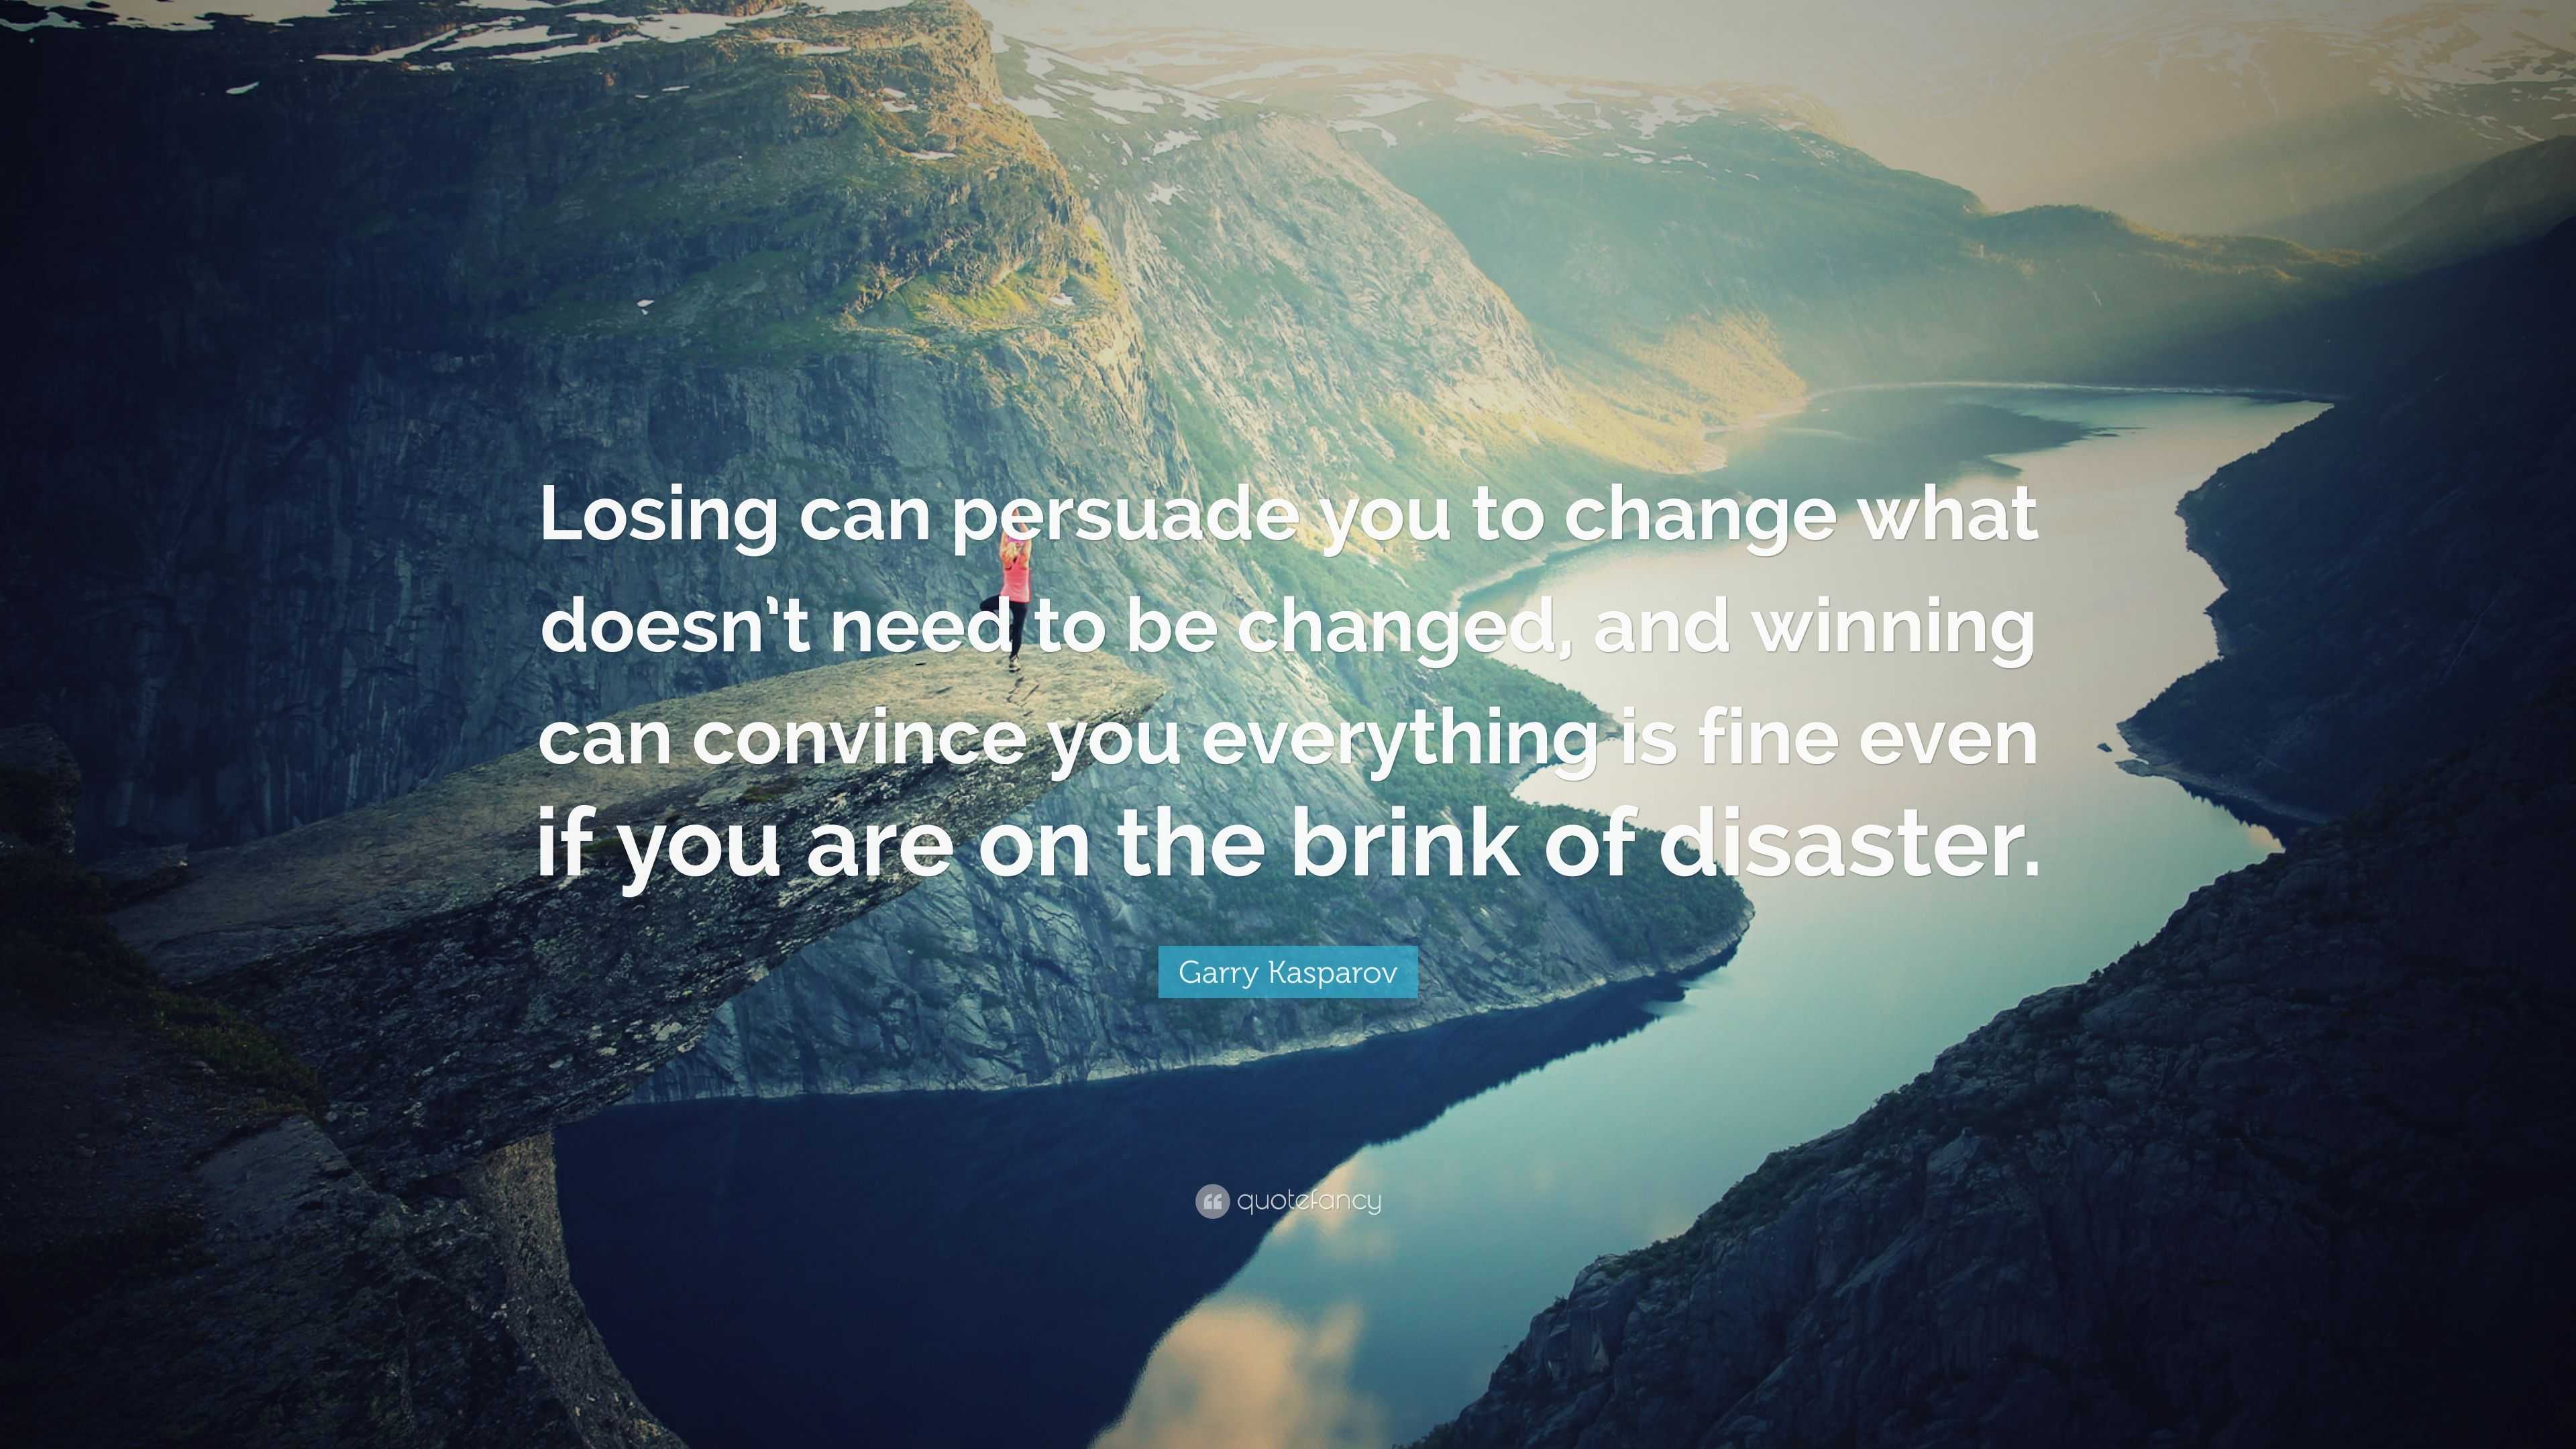 Garry Kasparov Quote: “Losing can persuade you to change what doesn’t ...